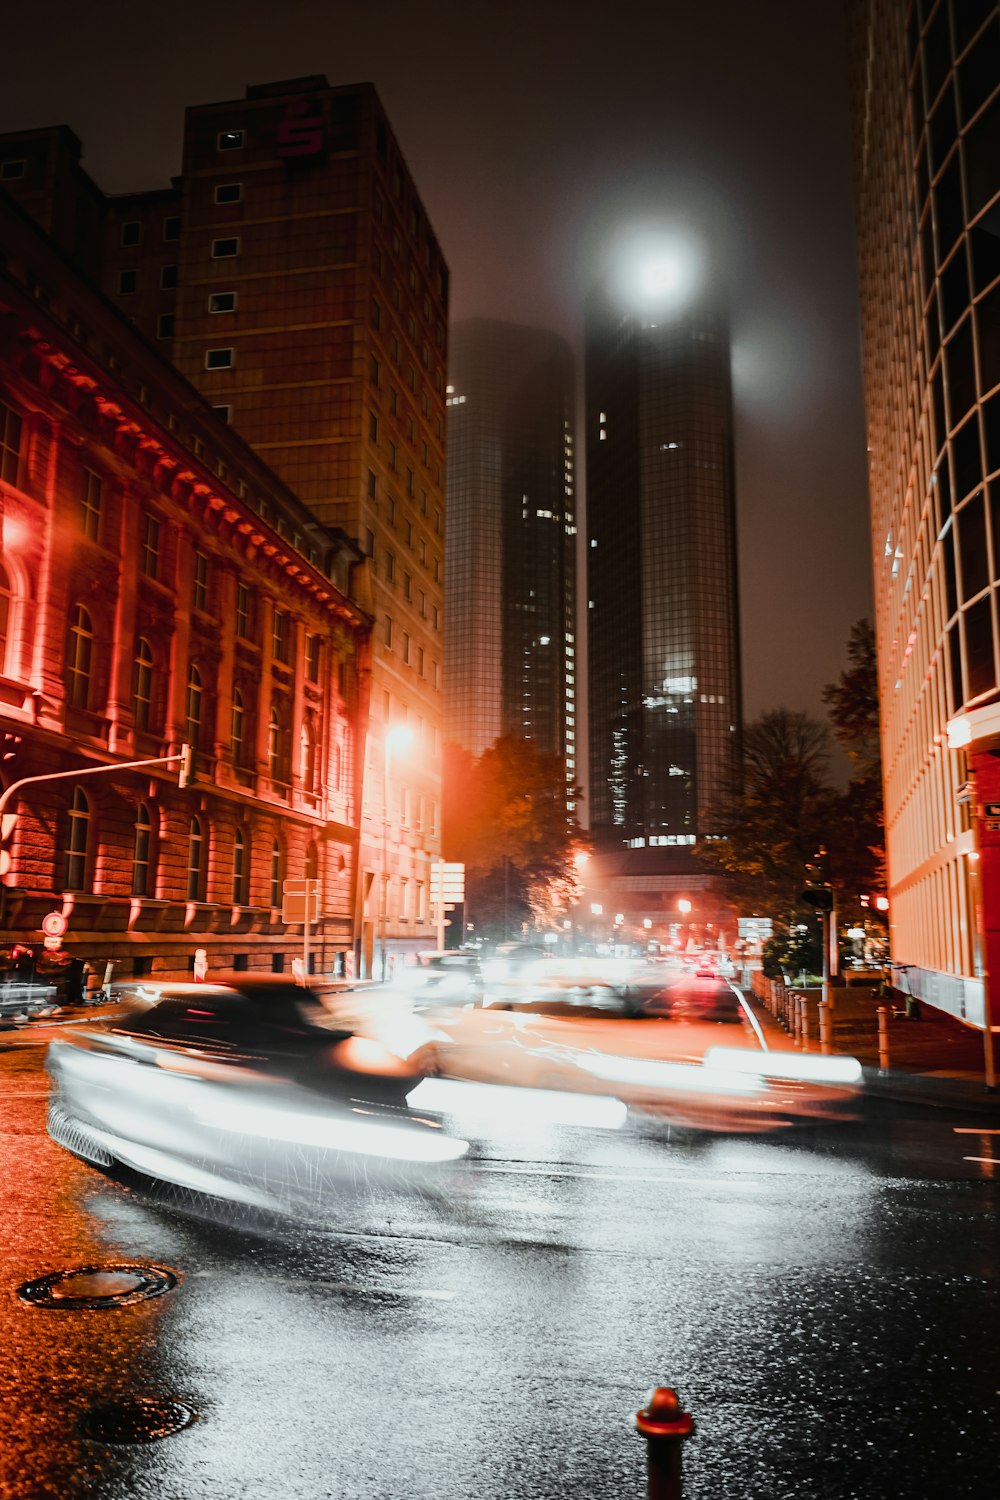 a blurry picture of a city street at night